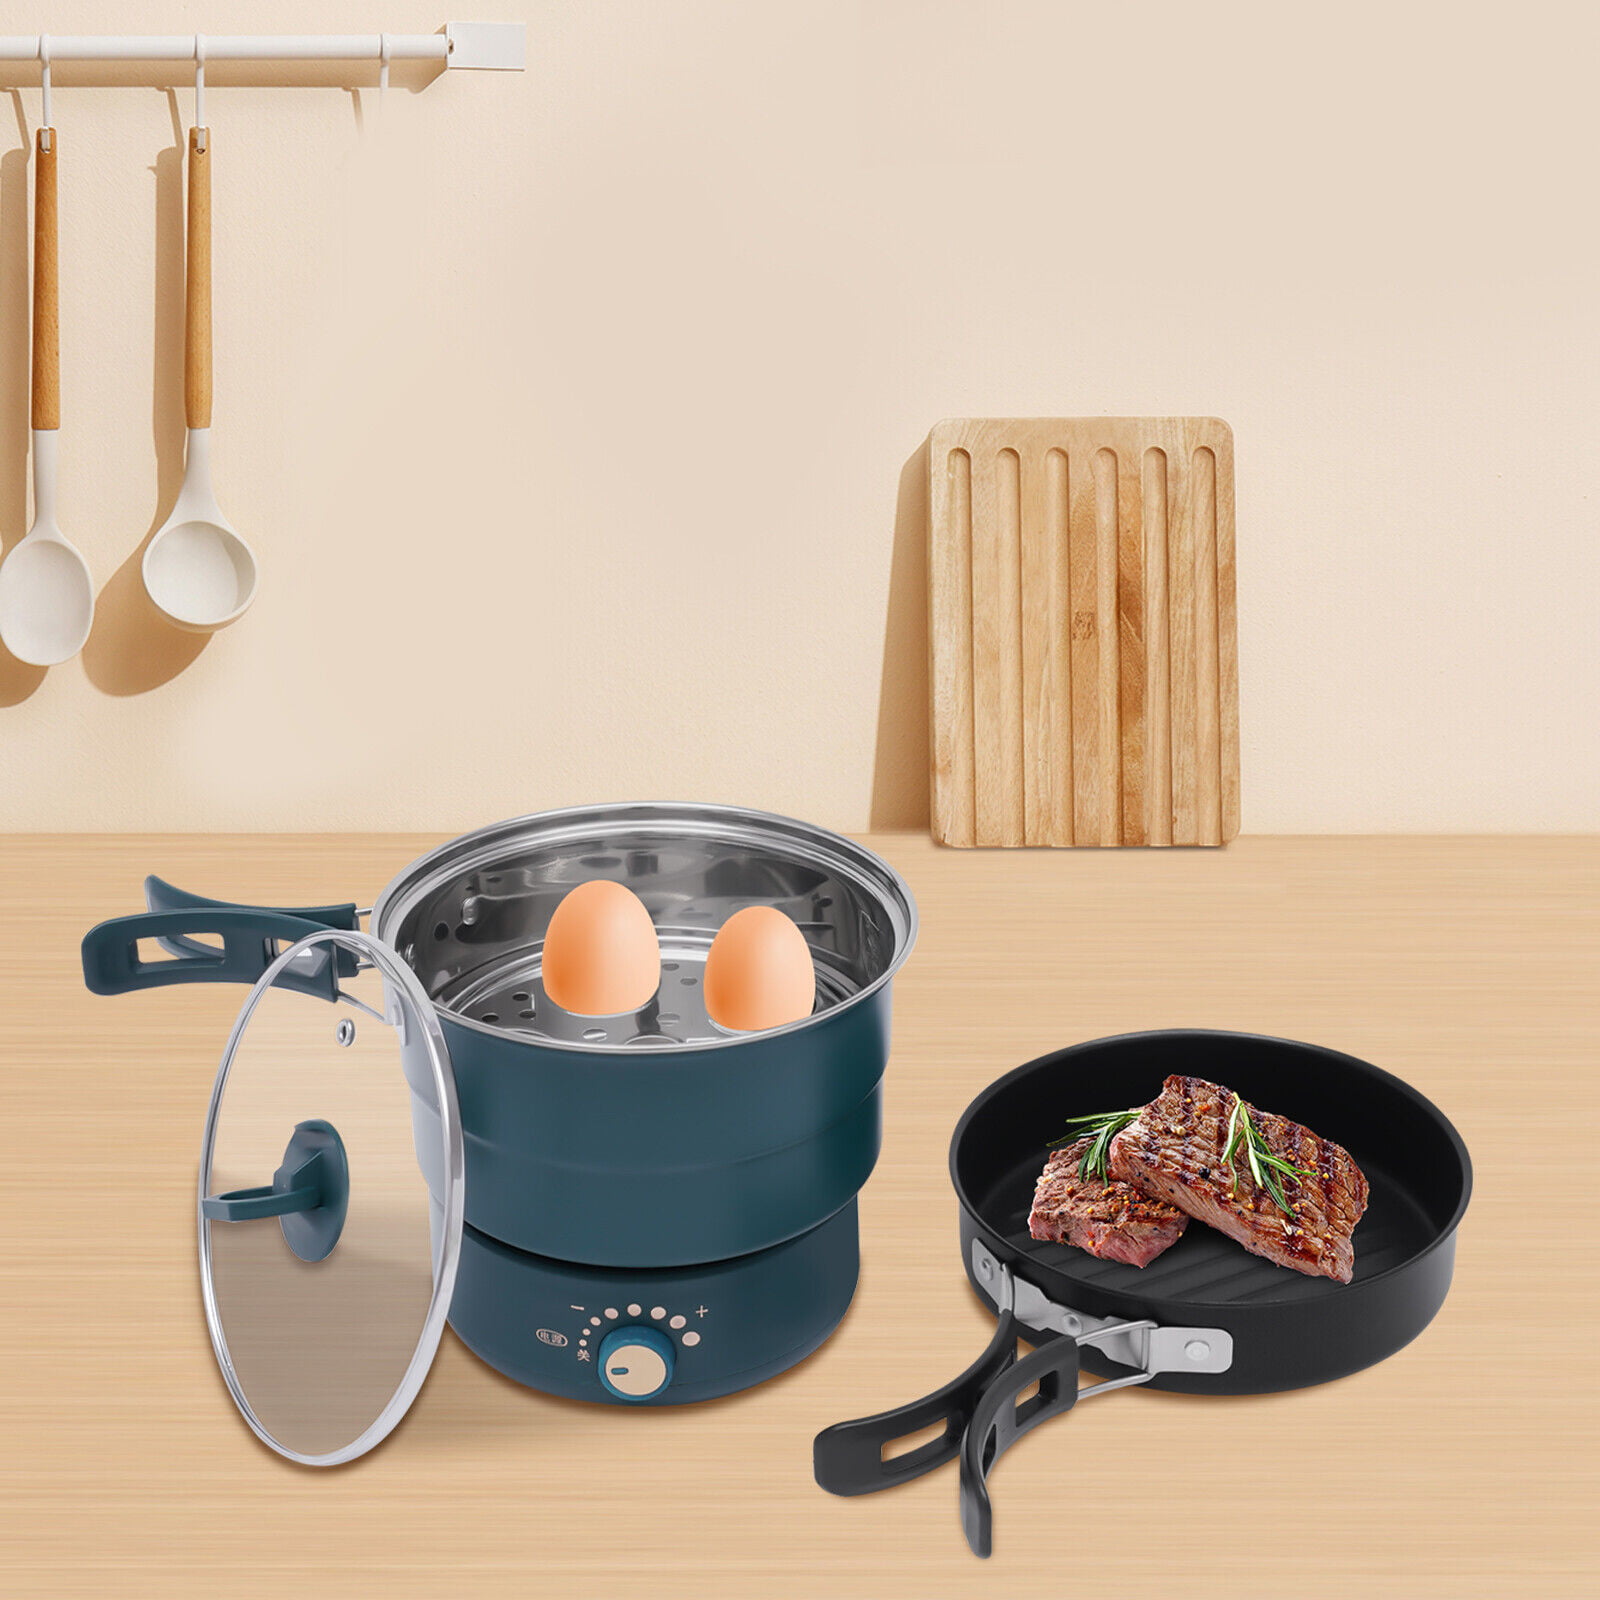 Multifunctional Electric Hot Pot - Cook Noodles, Wok, and More with Ease